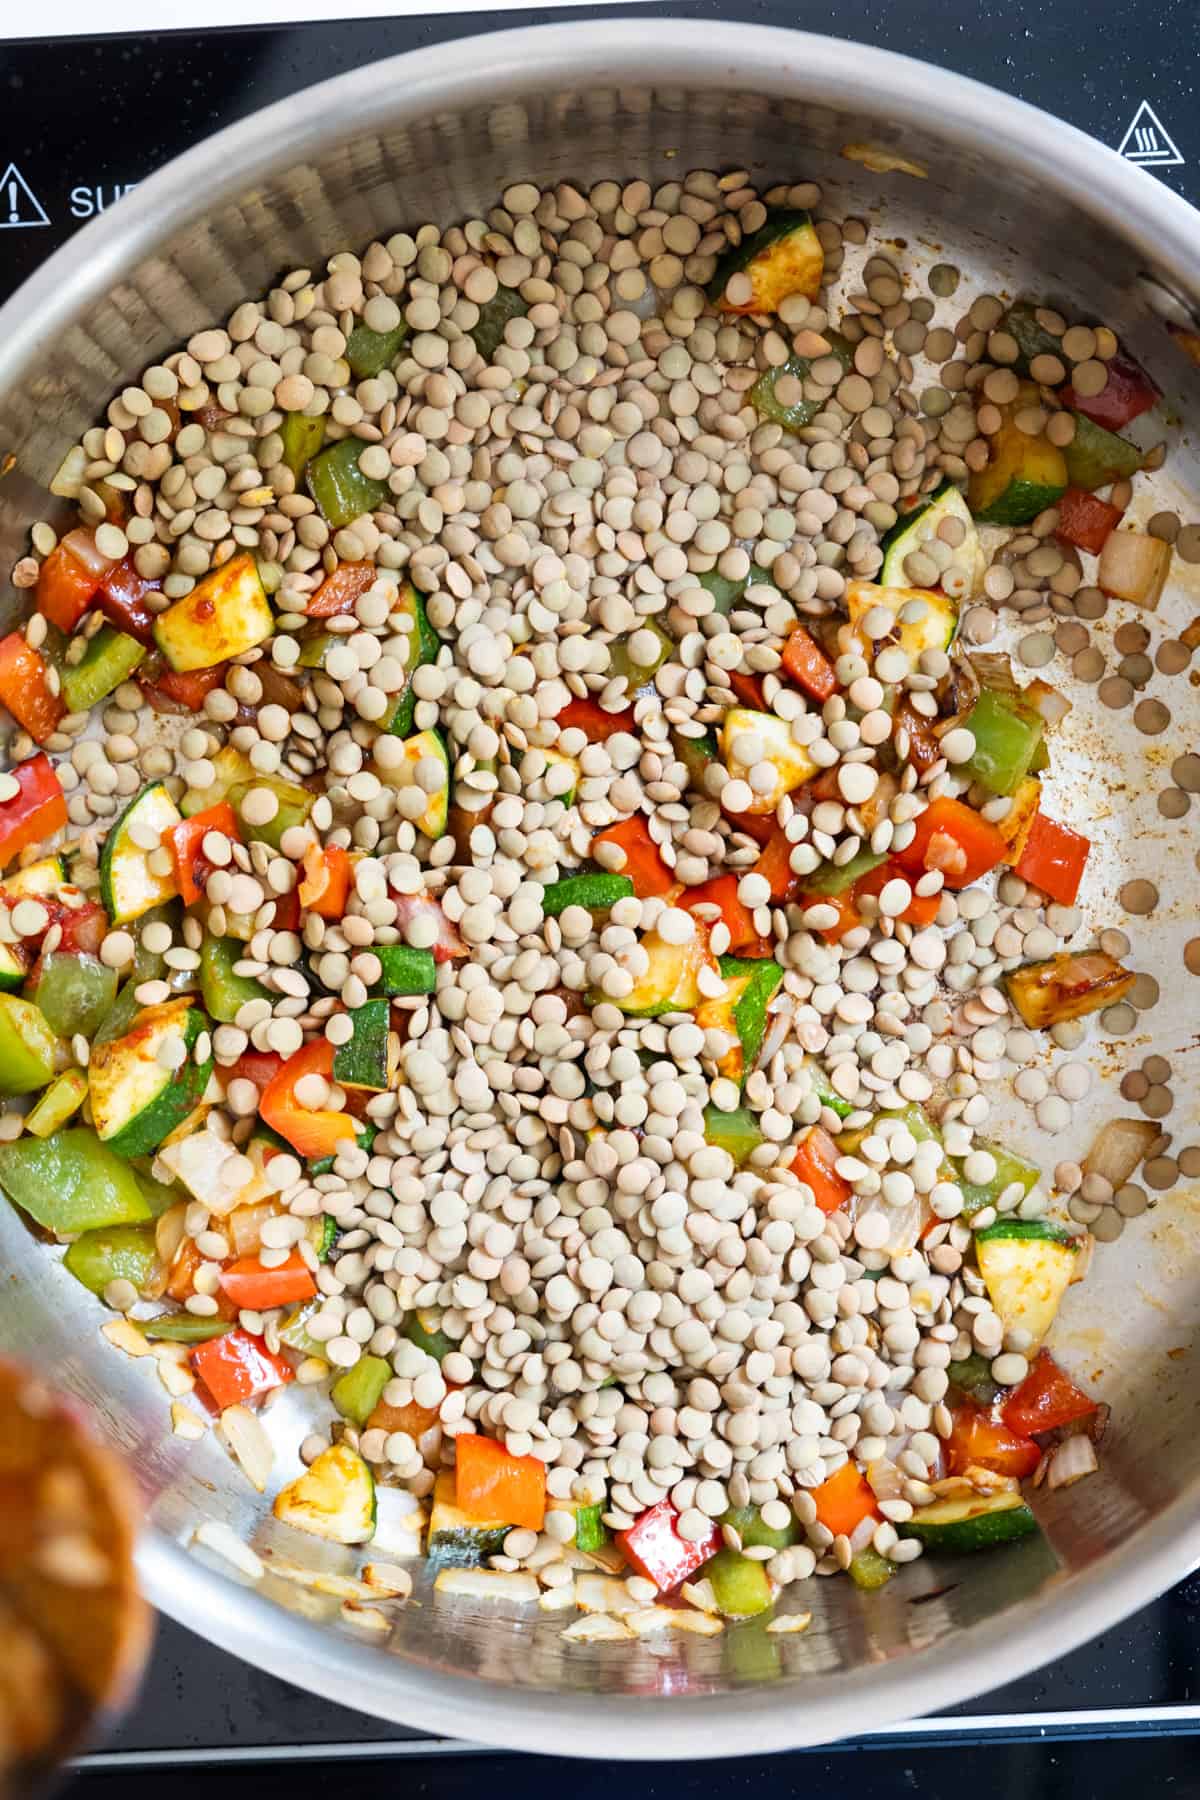 sauteed vegetables with lentils added